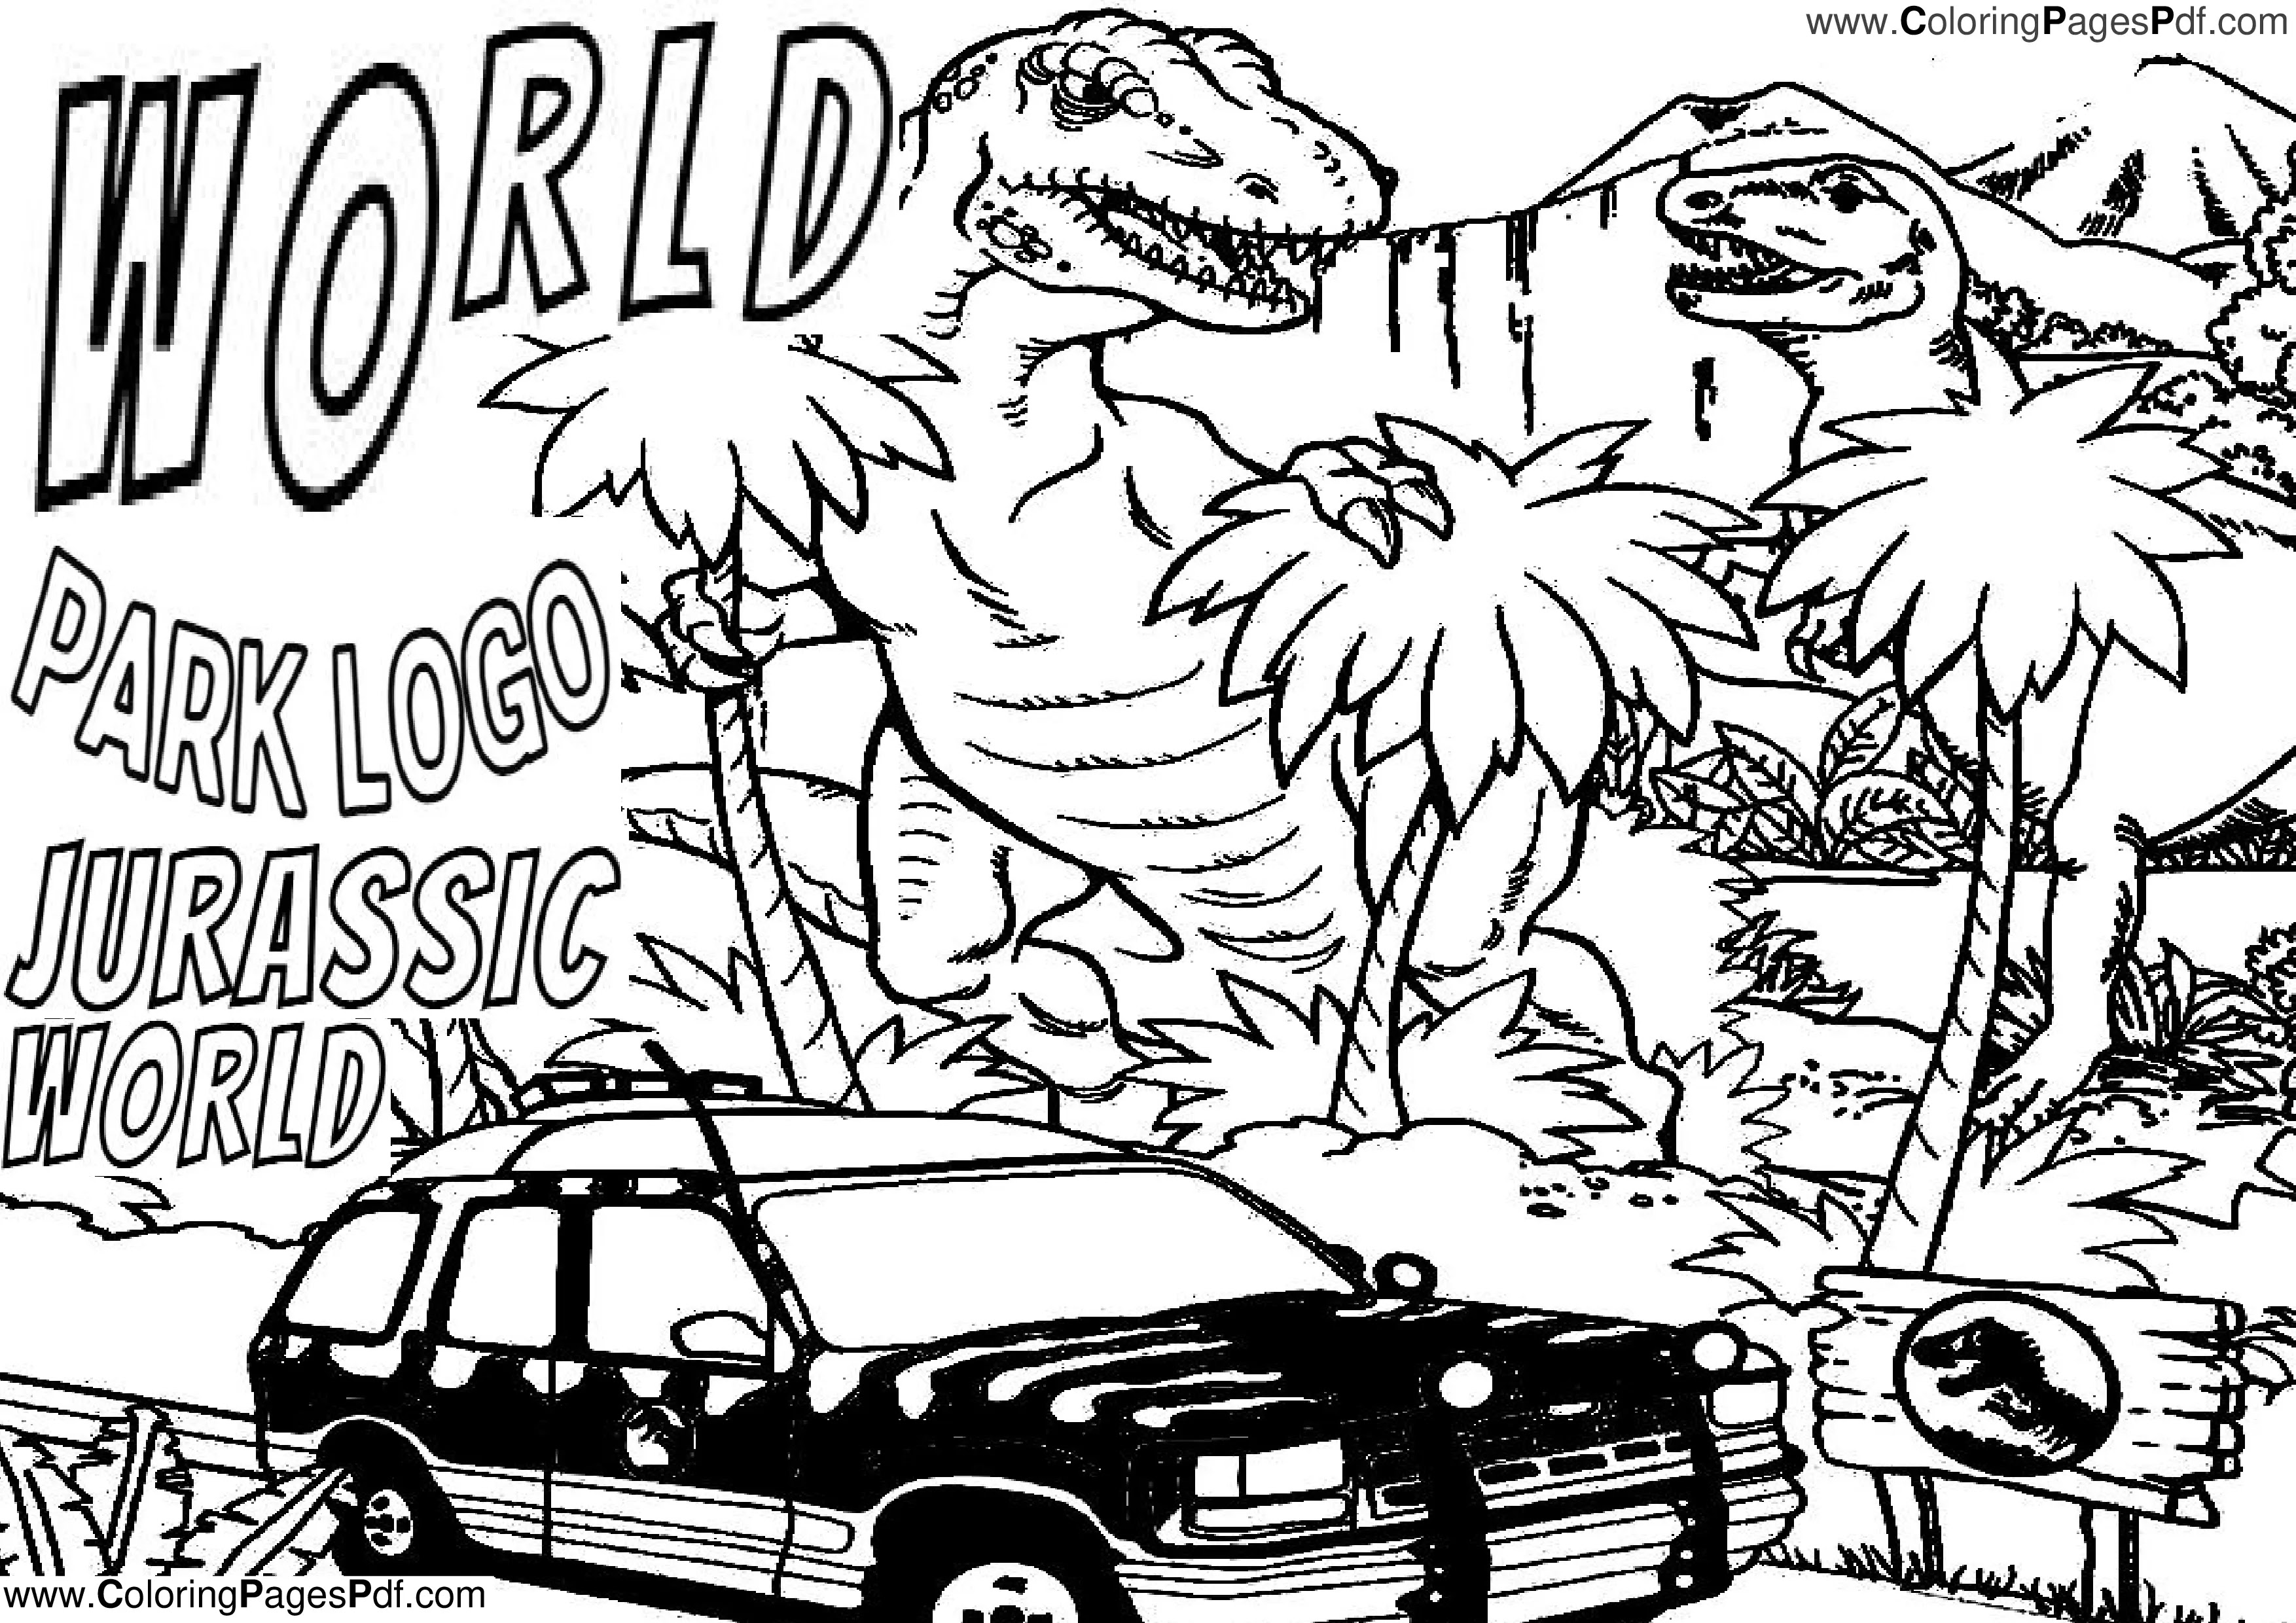 Jurassic Park Logo Printable coloring pages